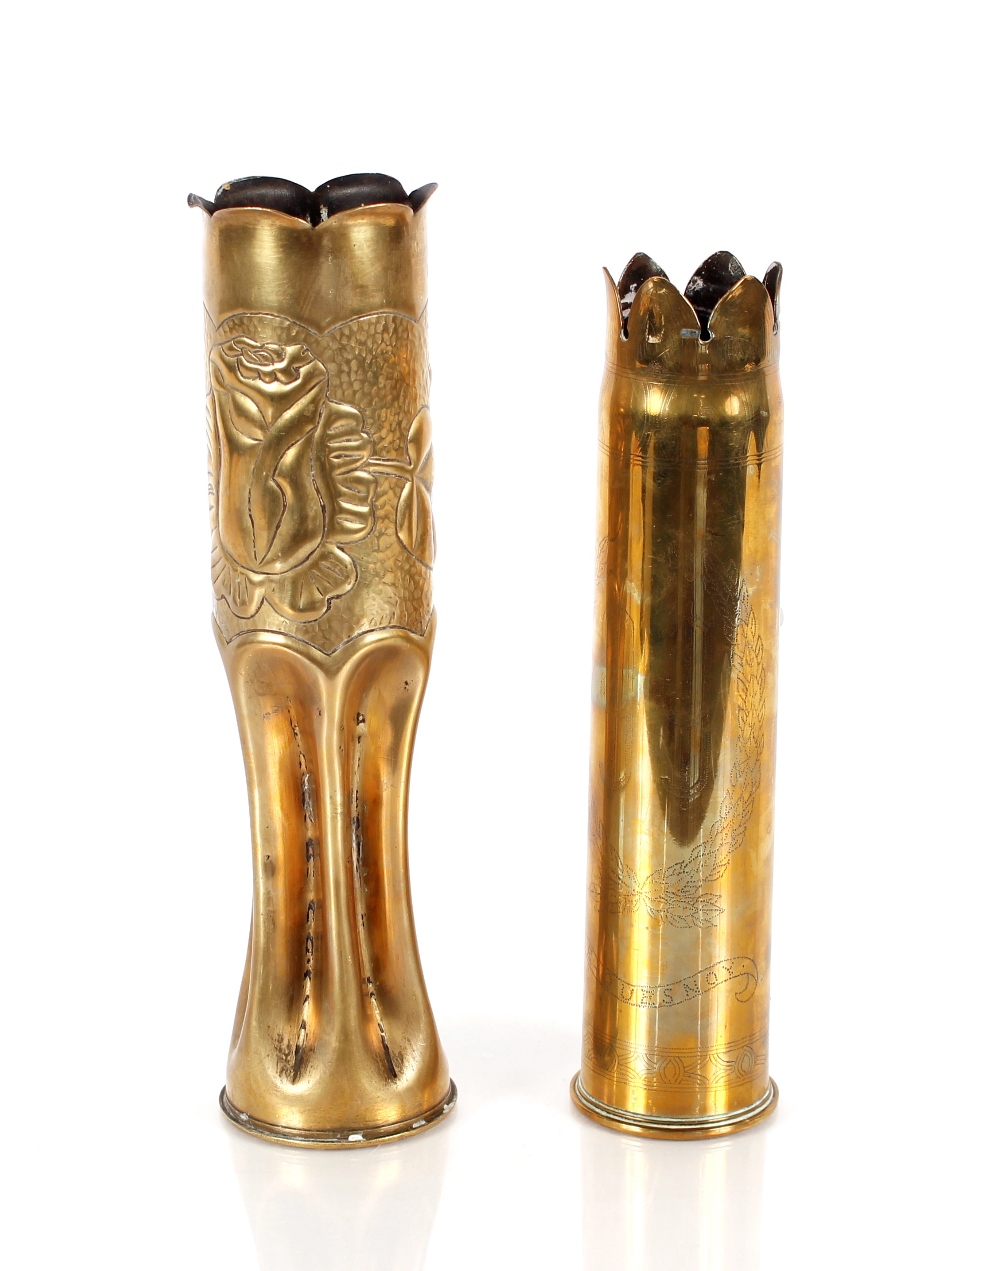 A Great war brass Trench Art shell case, engraved "Le Quesnoy", 30cm high; together with a WW2